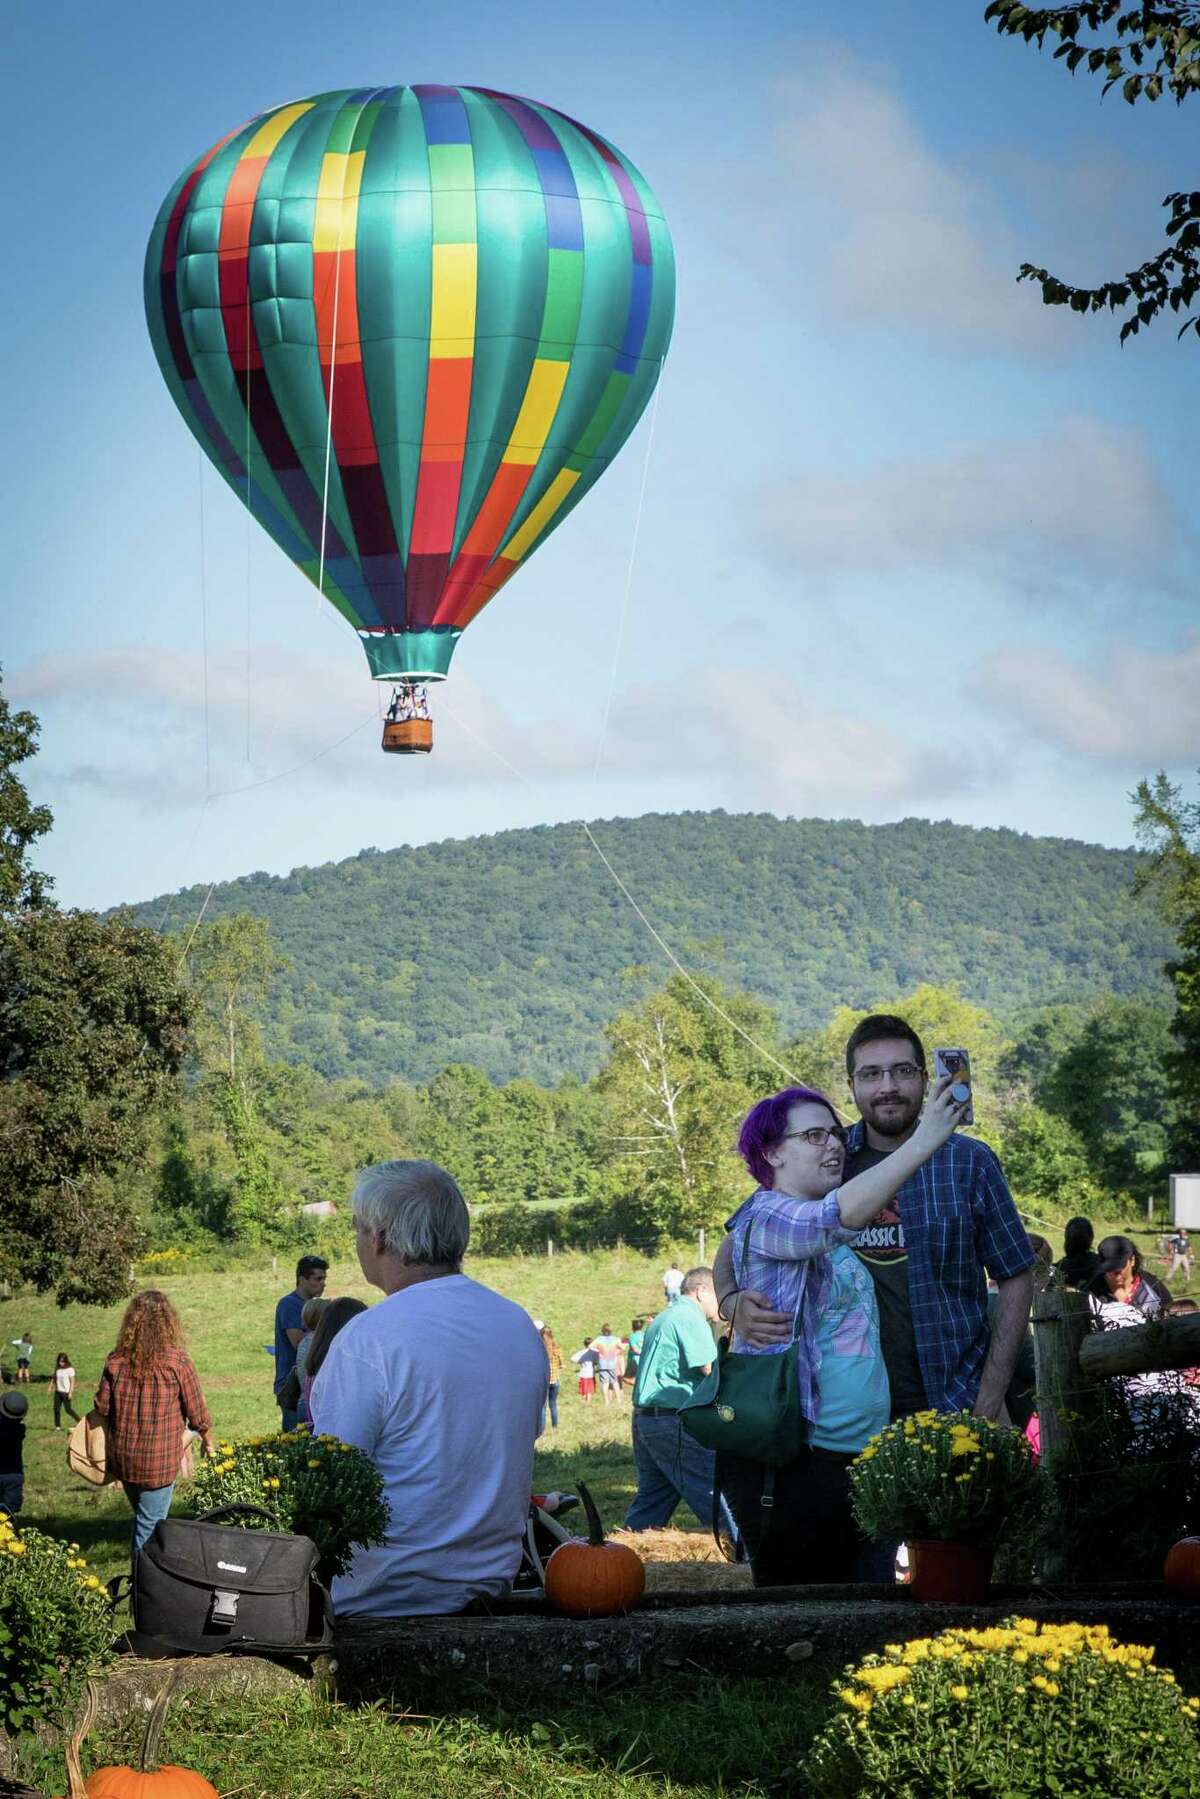 Elizabeth Edwards and Javier Martinez of New Milford pose for a selfie with the hot-air balloon as the background during the Weantinoge Heritage Land Trust fall celebration on Saturday, September 15, 2018, at Smyrski Farm in New Milford, CT. Liberty Balloon Company out of Groveland, NY, gave tethered hot-air balloon rides starting at 8am.